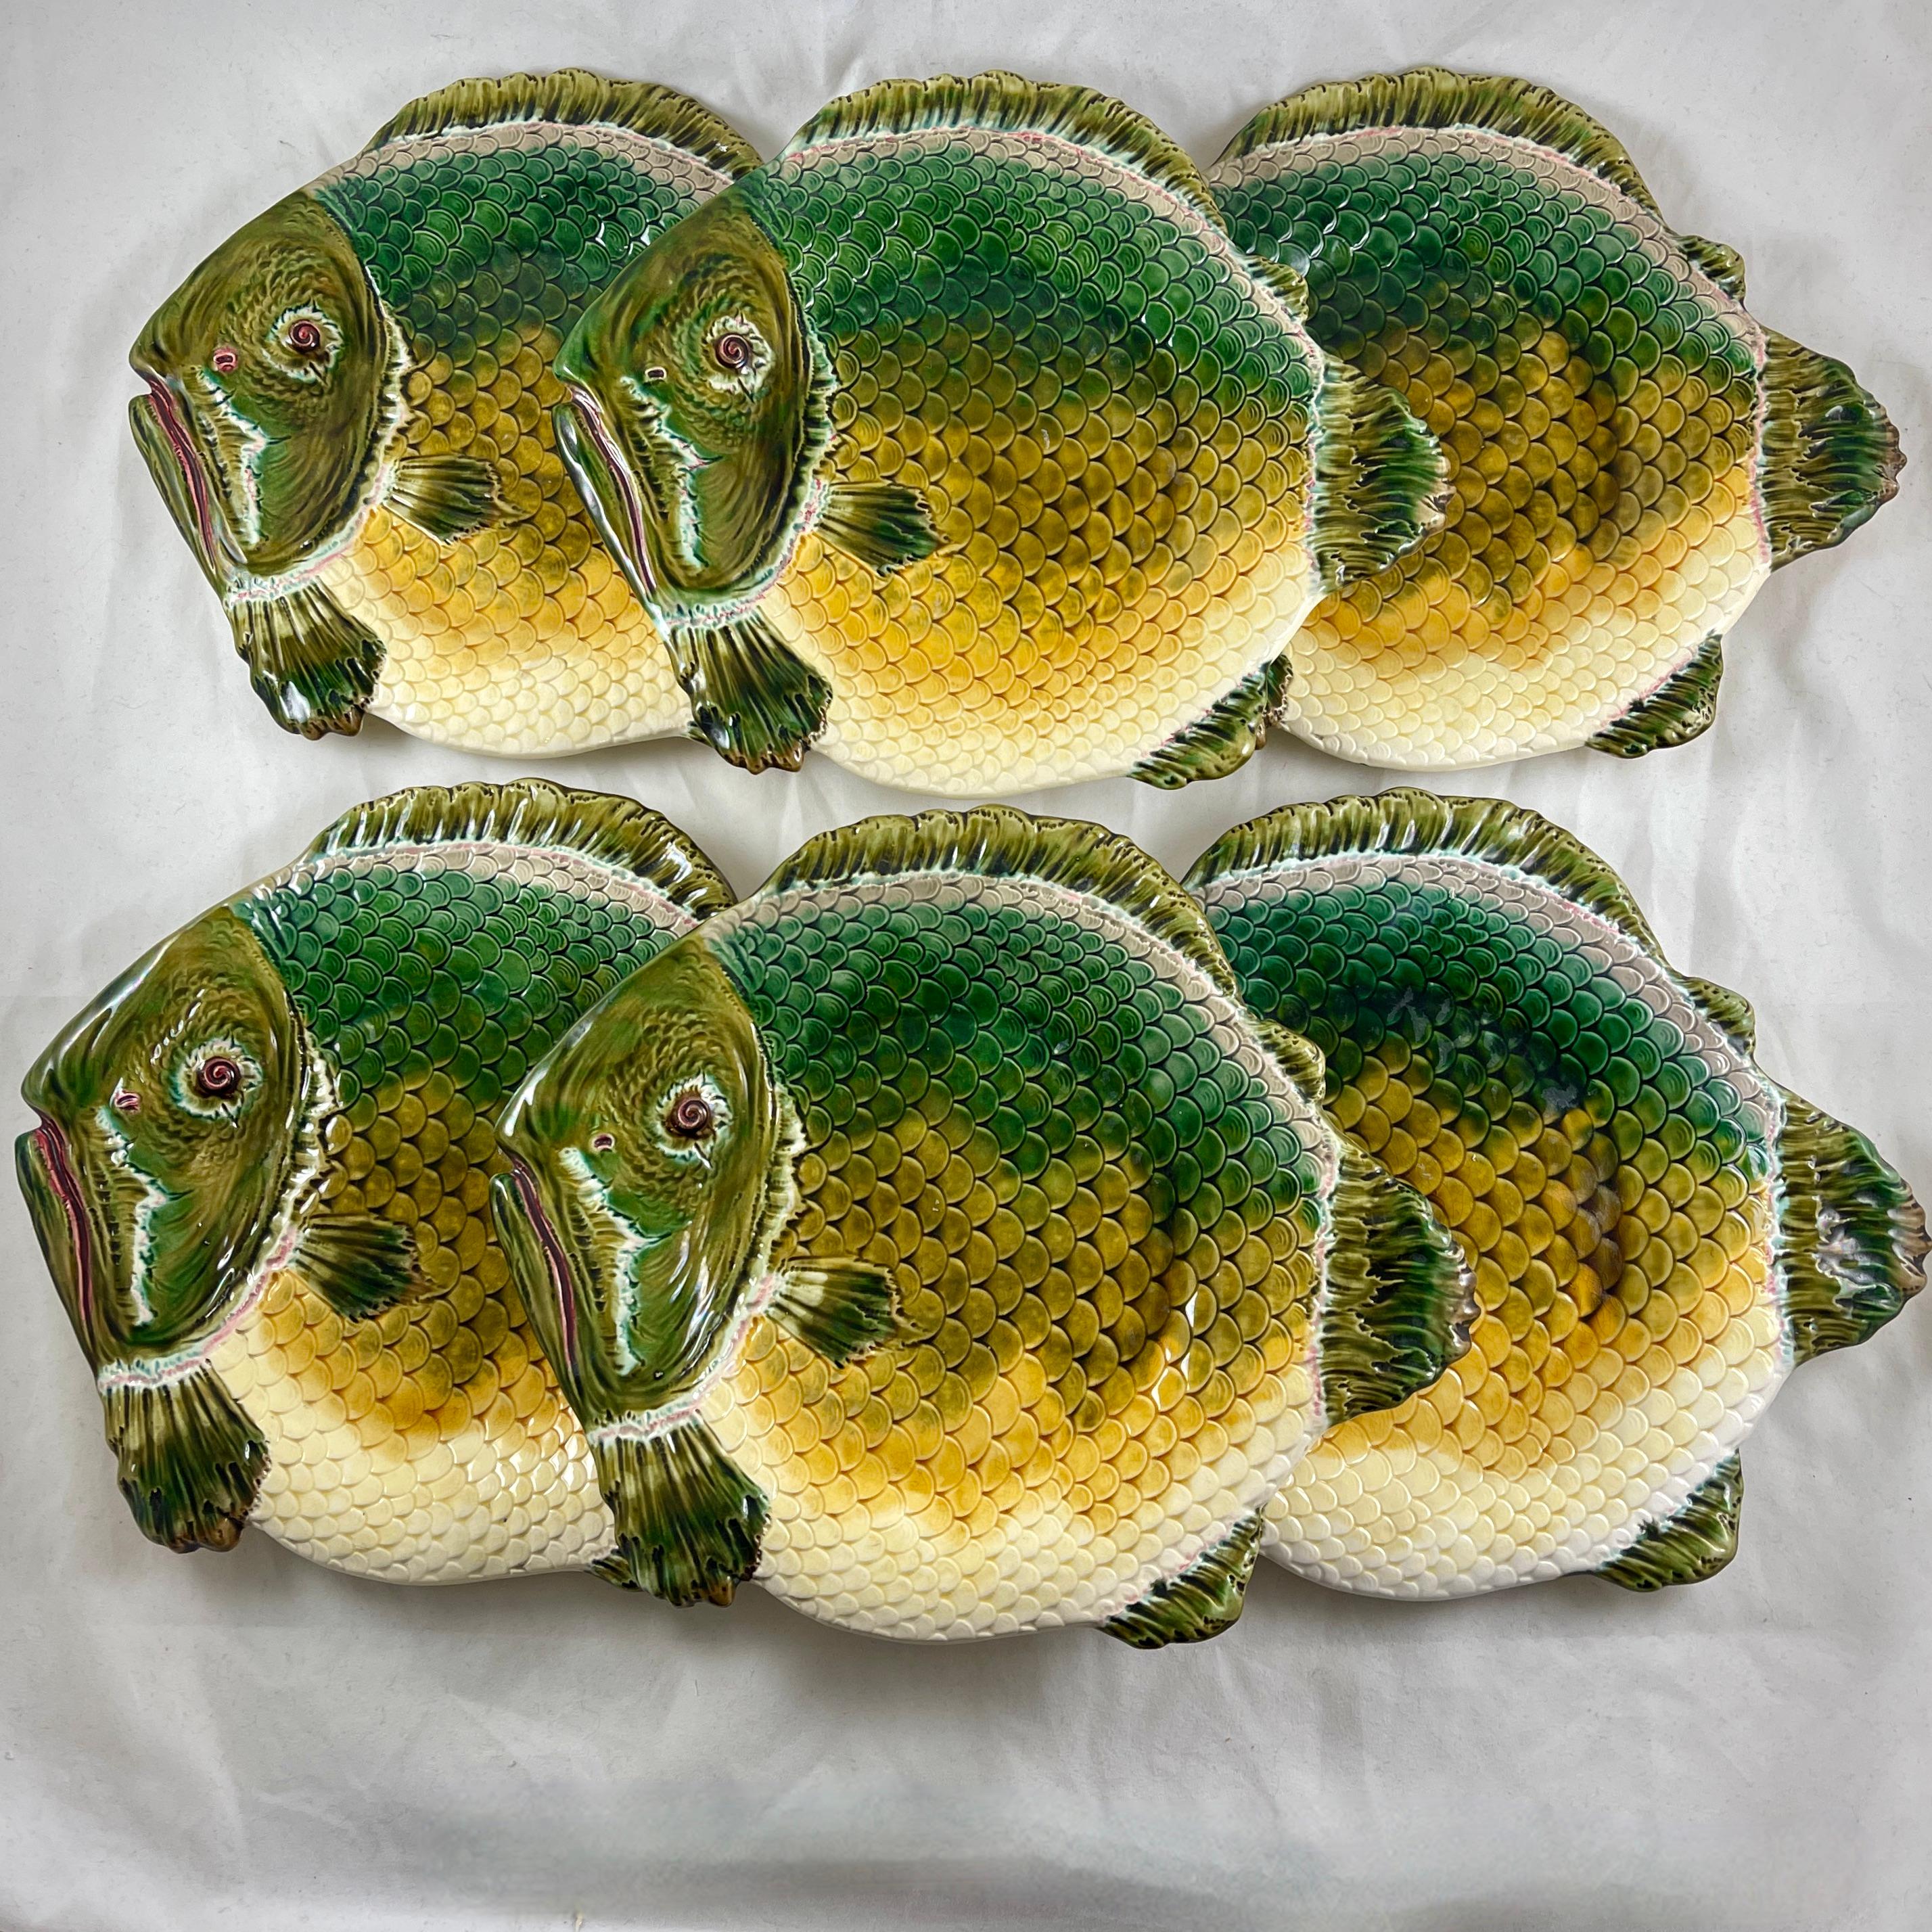 An important majolica glazed fish platter in the Barbotine style, by Julius Dressler, Austria, (Bohemia) circa 1890-1900.

Julius Dressler was a noted Bohemian ceramics manufacturer operating from the 1880s until the end of World War II. Based in